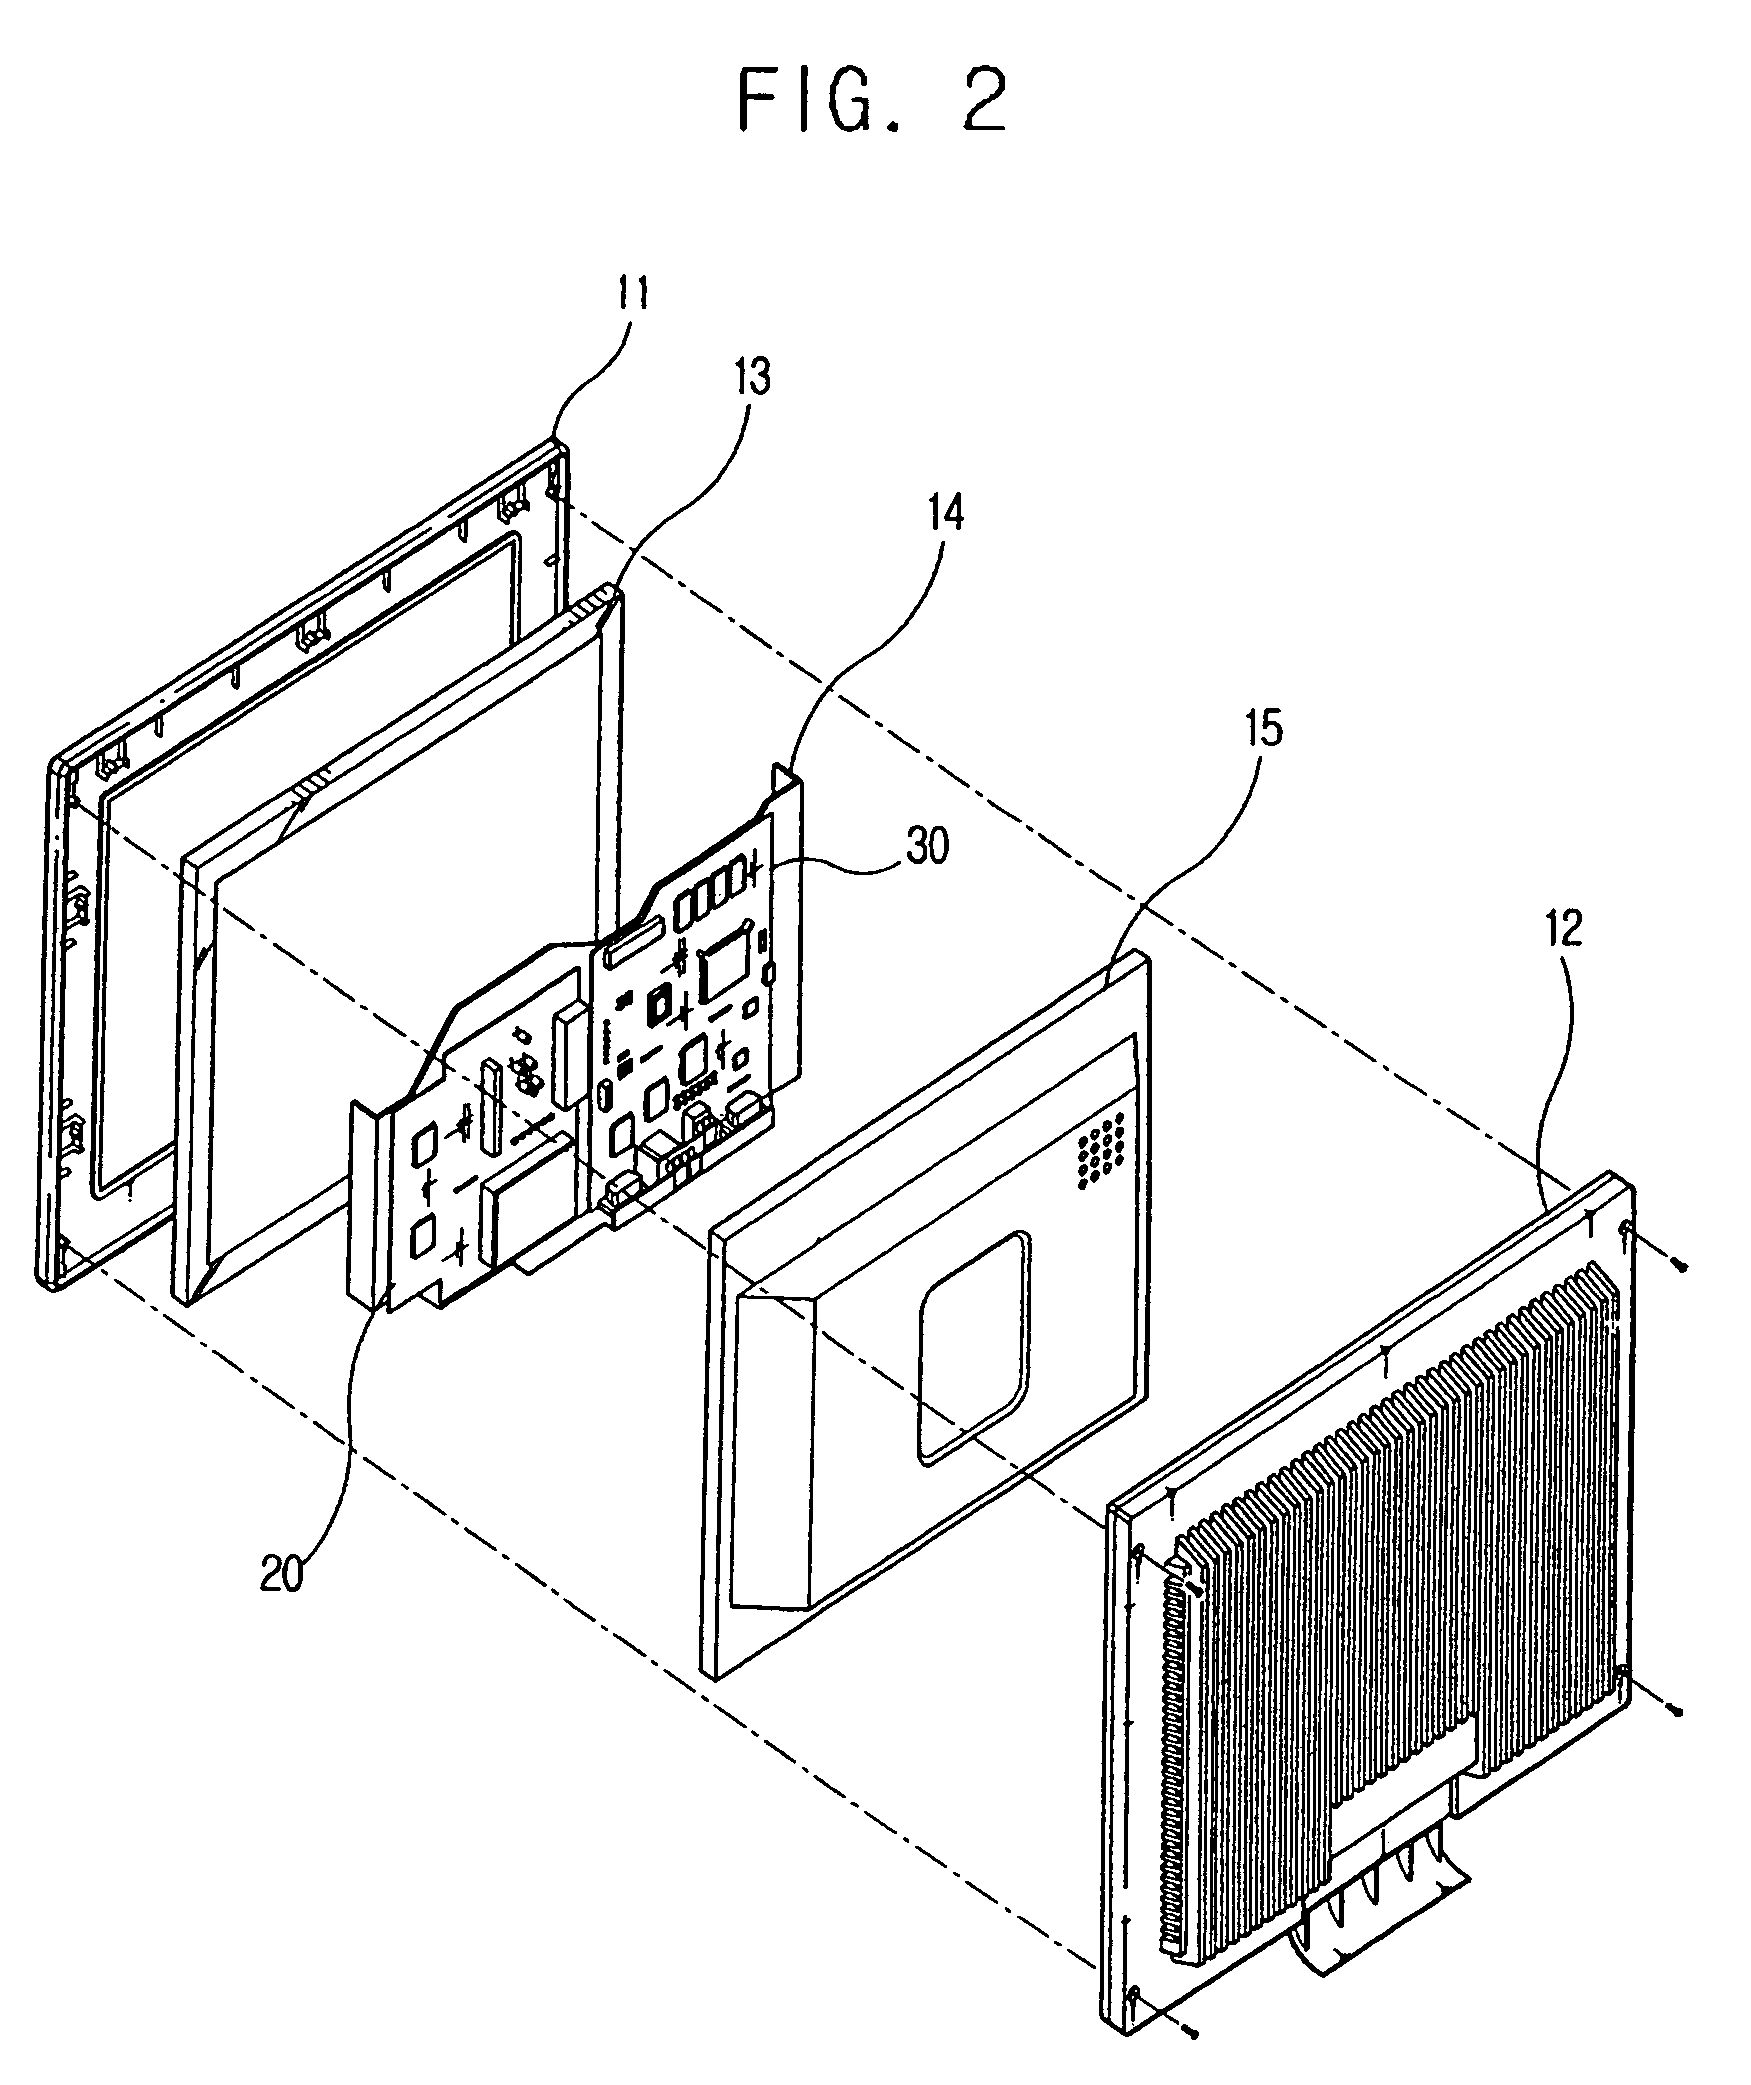 Display apparatus having a display module that supports various functions